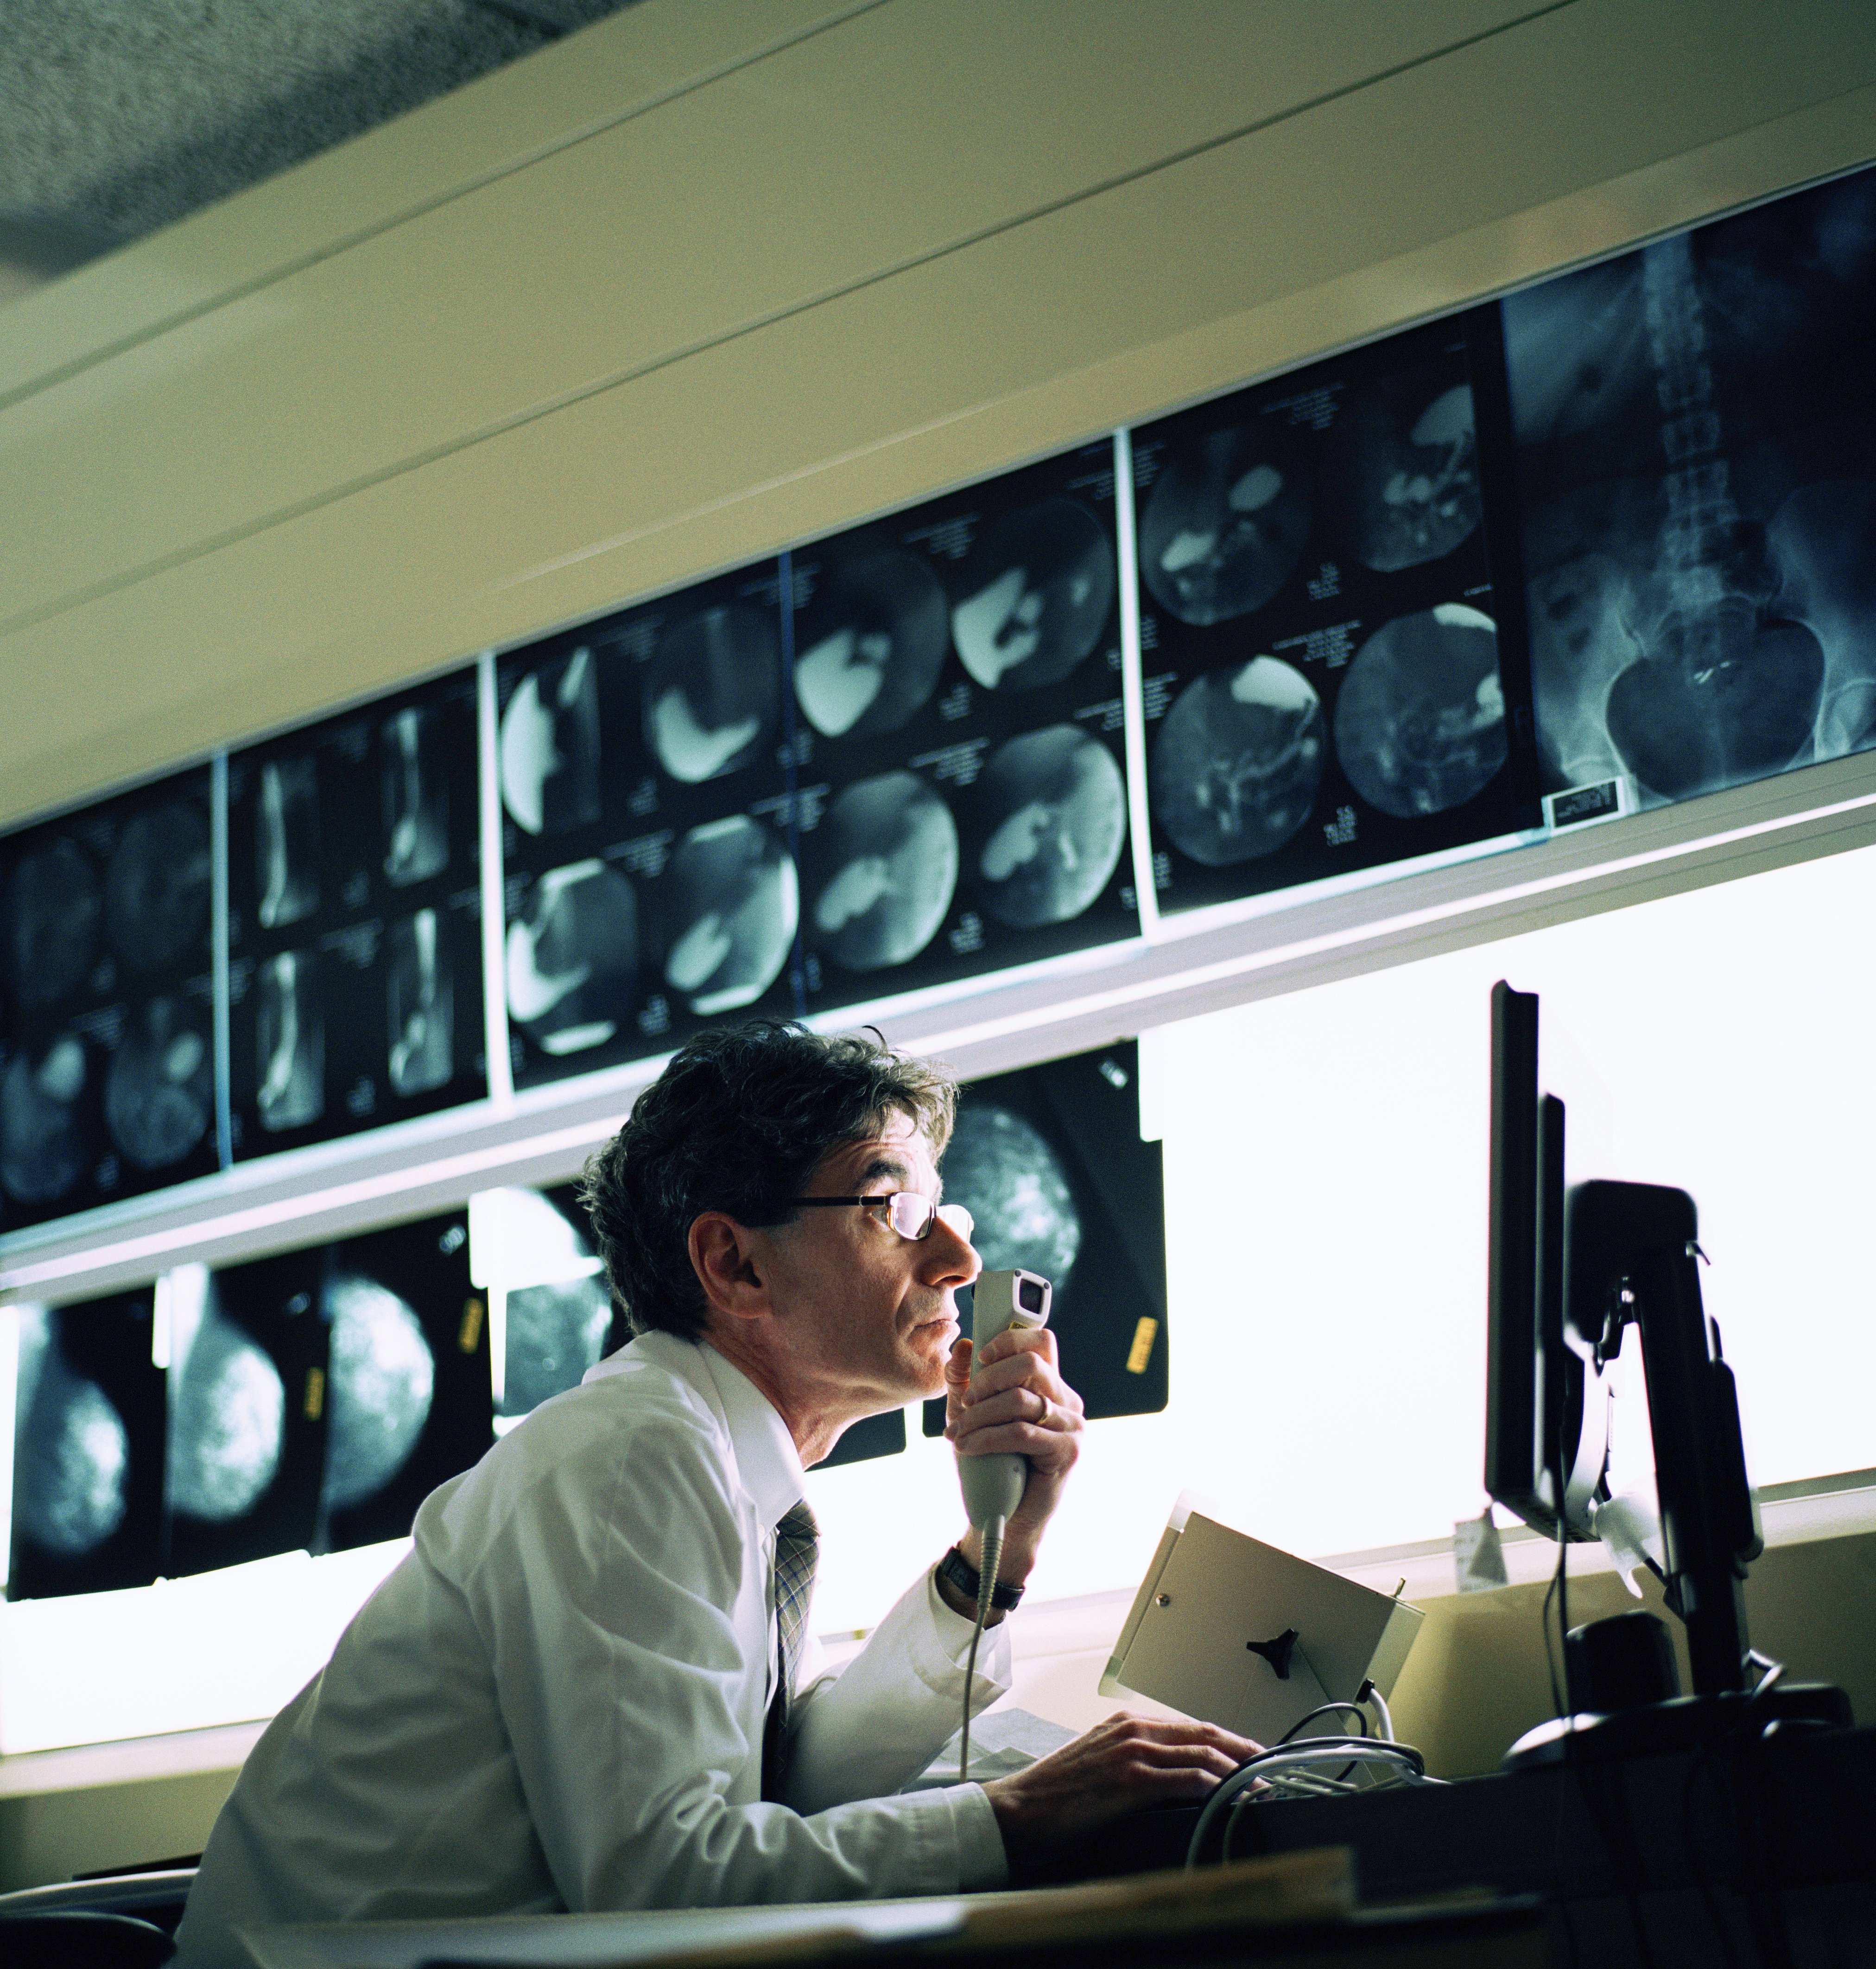 Healthcare organizations must evaluate alternatives to help their radiology departments run more efficiently and adeptly handle the workload in front of them